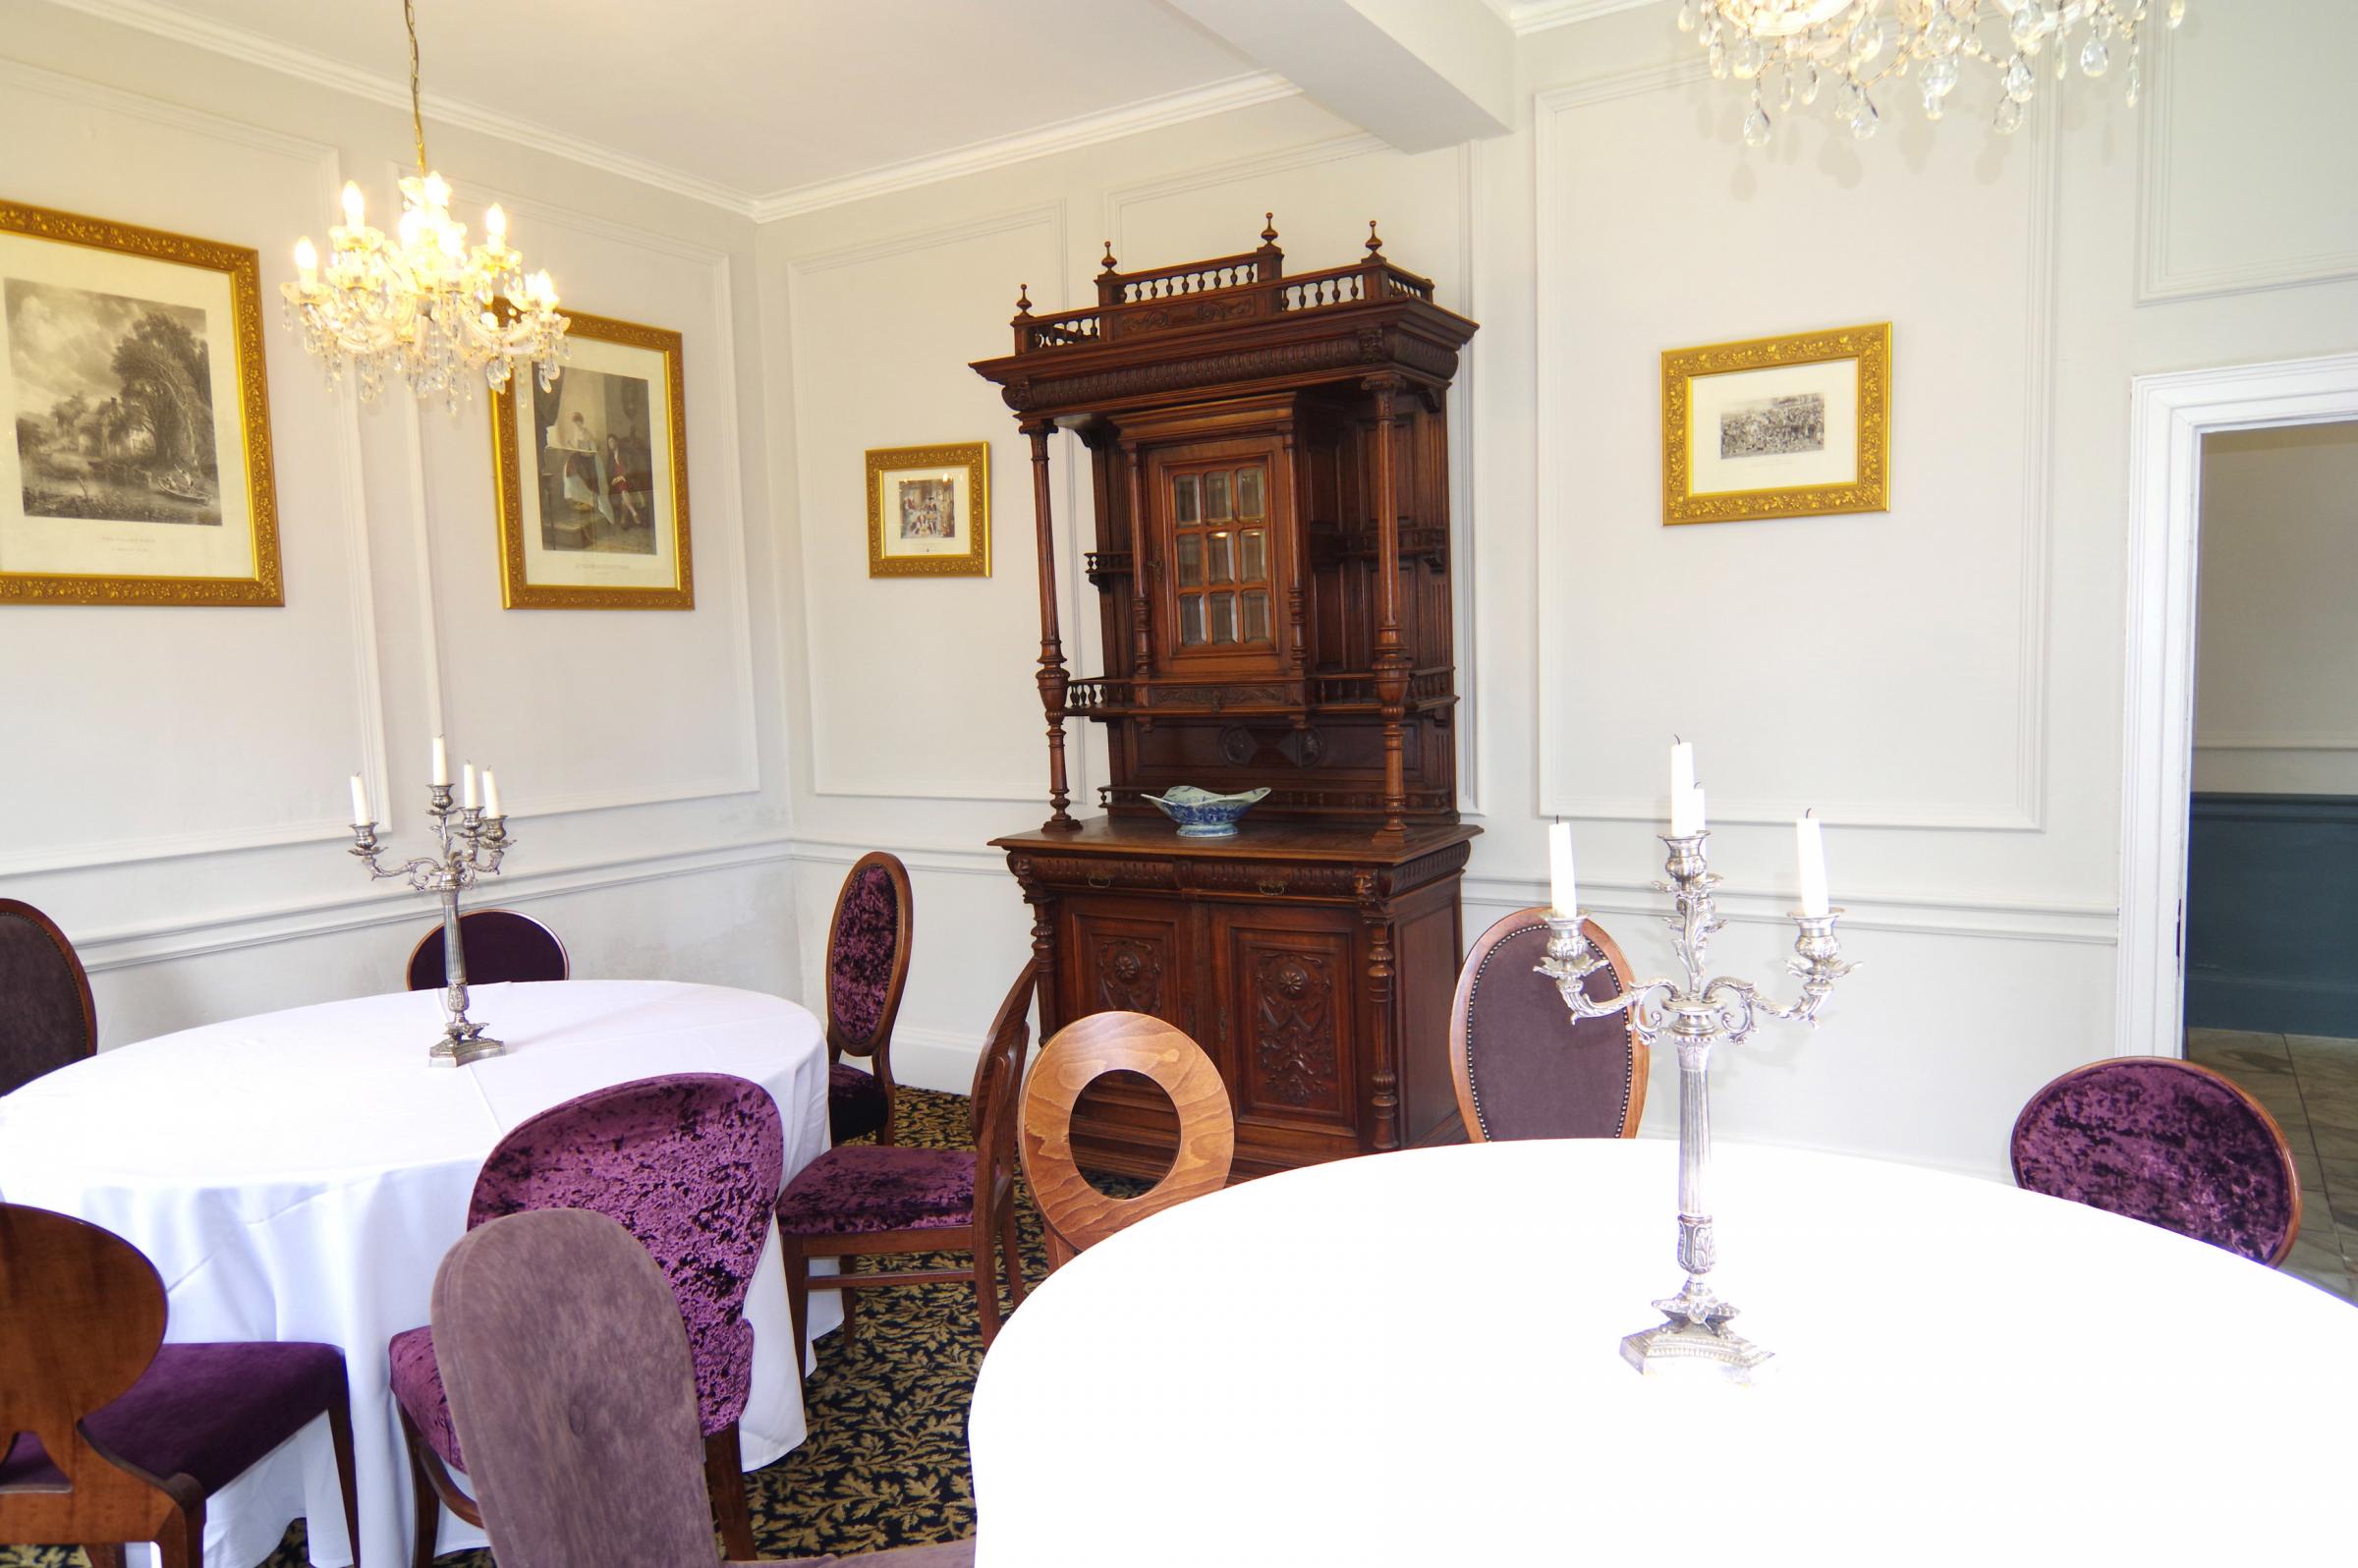 One of the private dining rooms at Pinchinthorpe Hall